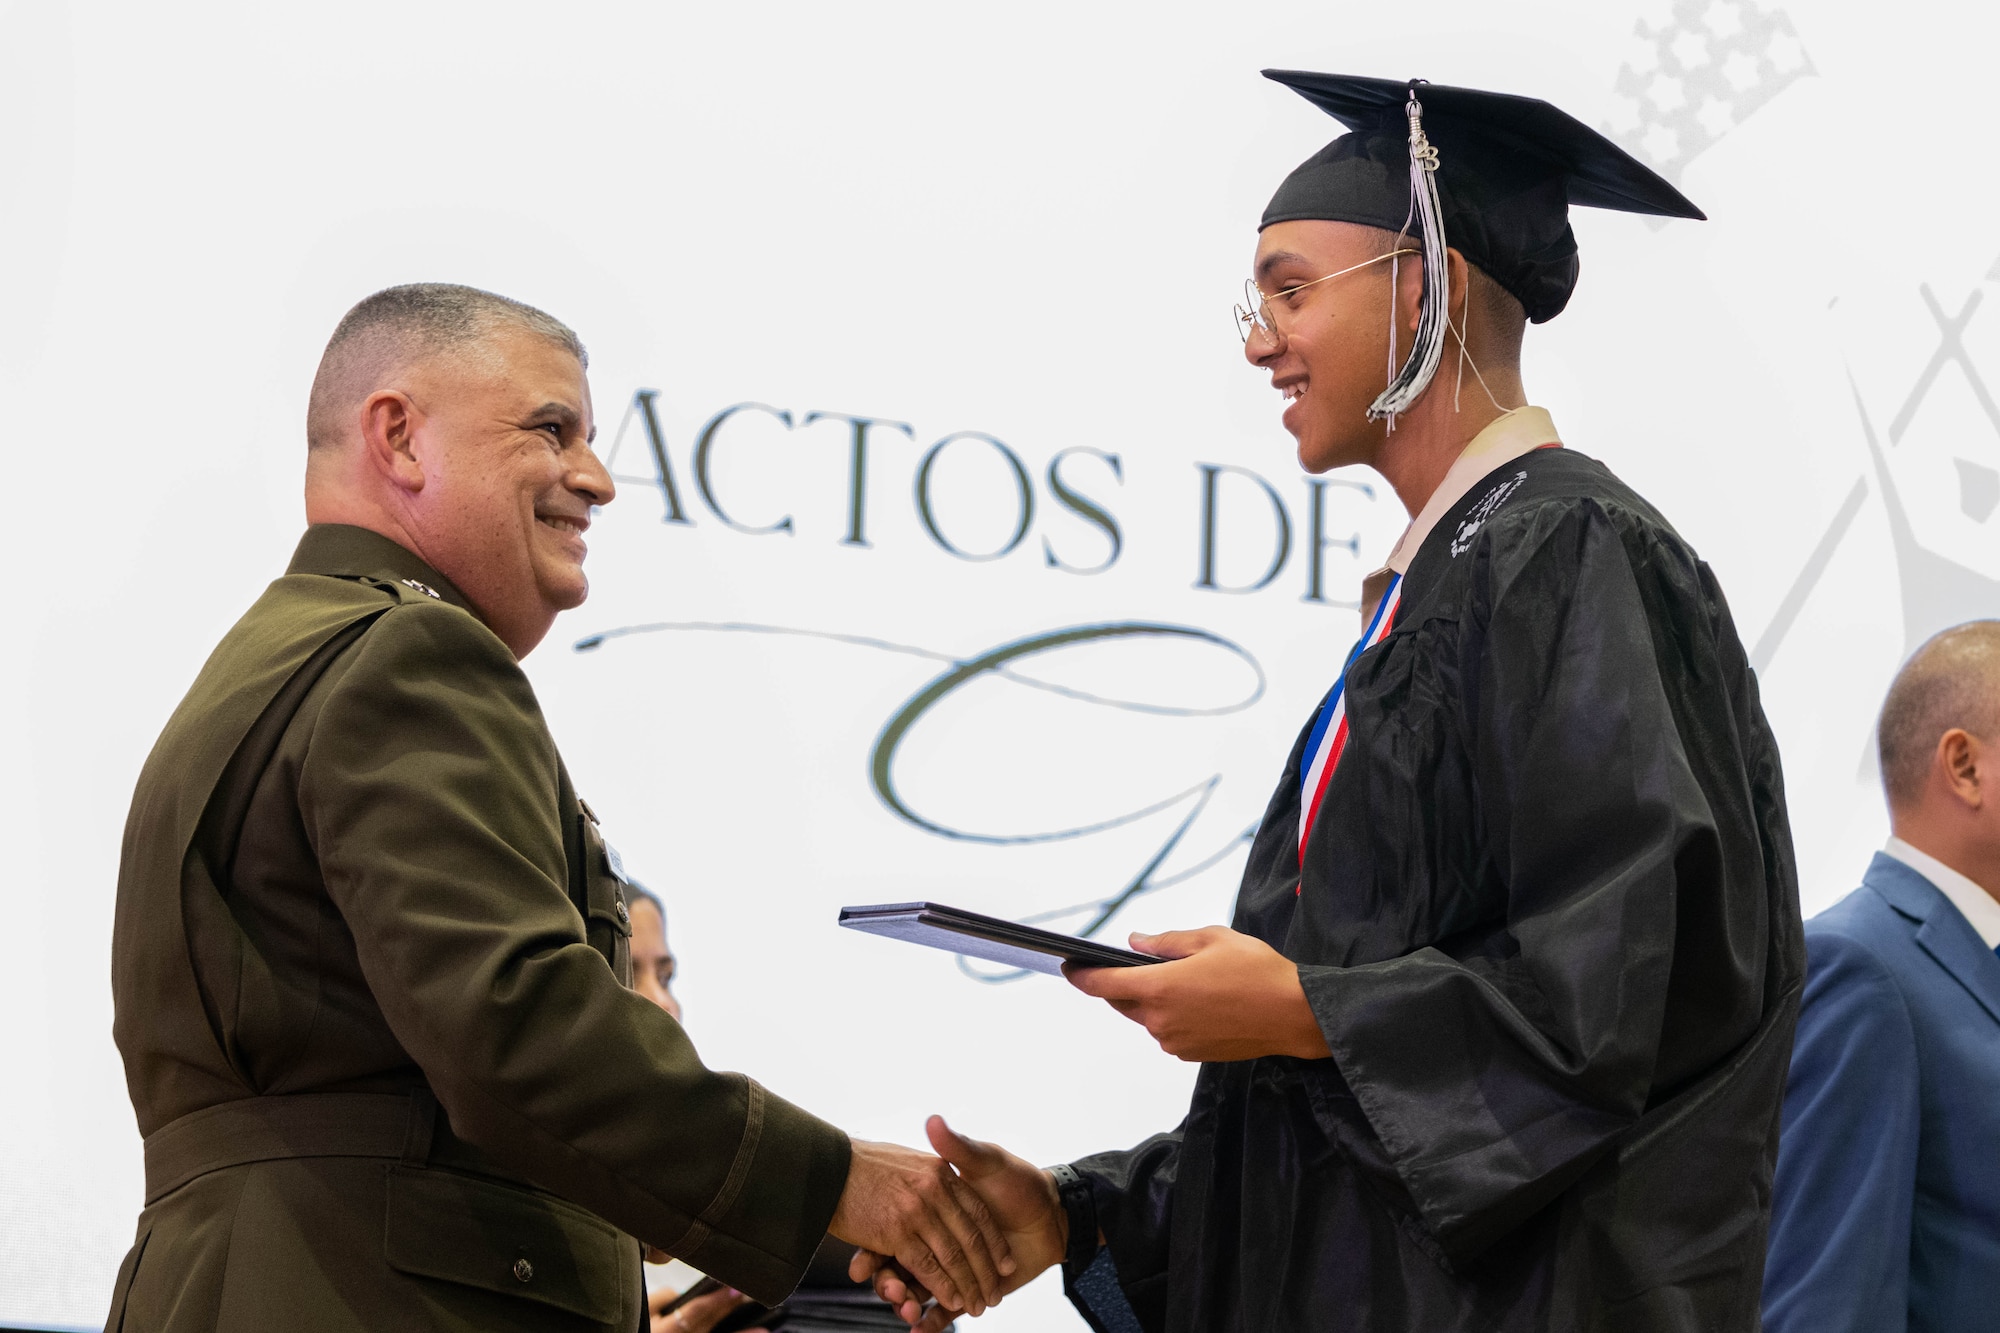 U.S. Army Maj. Gen. Miguel A. Mendez, the adjutant general of Puerto Rico, congratulates Cadet Jan Lopez with the Puerto Rico National Guard Youth ChalleNGe Academy, 3rd Platoon, Wolfpack, Class 23-02, during his graduation ceremony at Pontifical Catholic University of Puerto Rico, Ponce, Puerto Rico, Sept. 15, 2023. Lopez received his high school diploma after completing the 22-week PRNG Youth ChalleNGe Academy program, where he studied for his high school diploma and also received vocational education from several career fields. (U.S. Air National Guard photo by 2nd. Lt. Eliezer Soto)